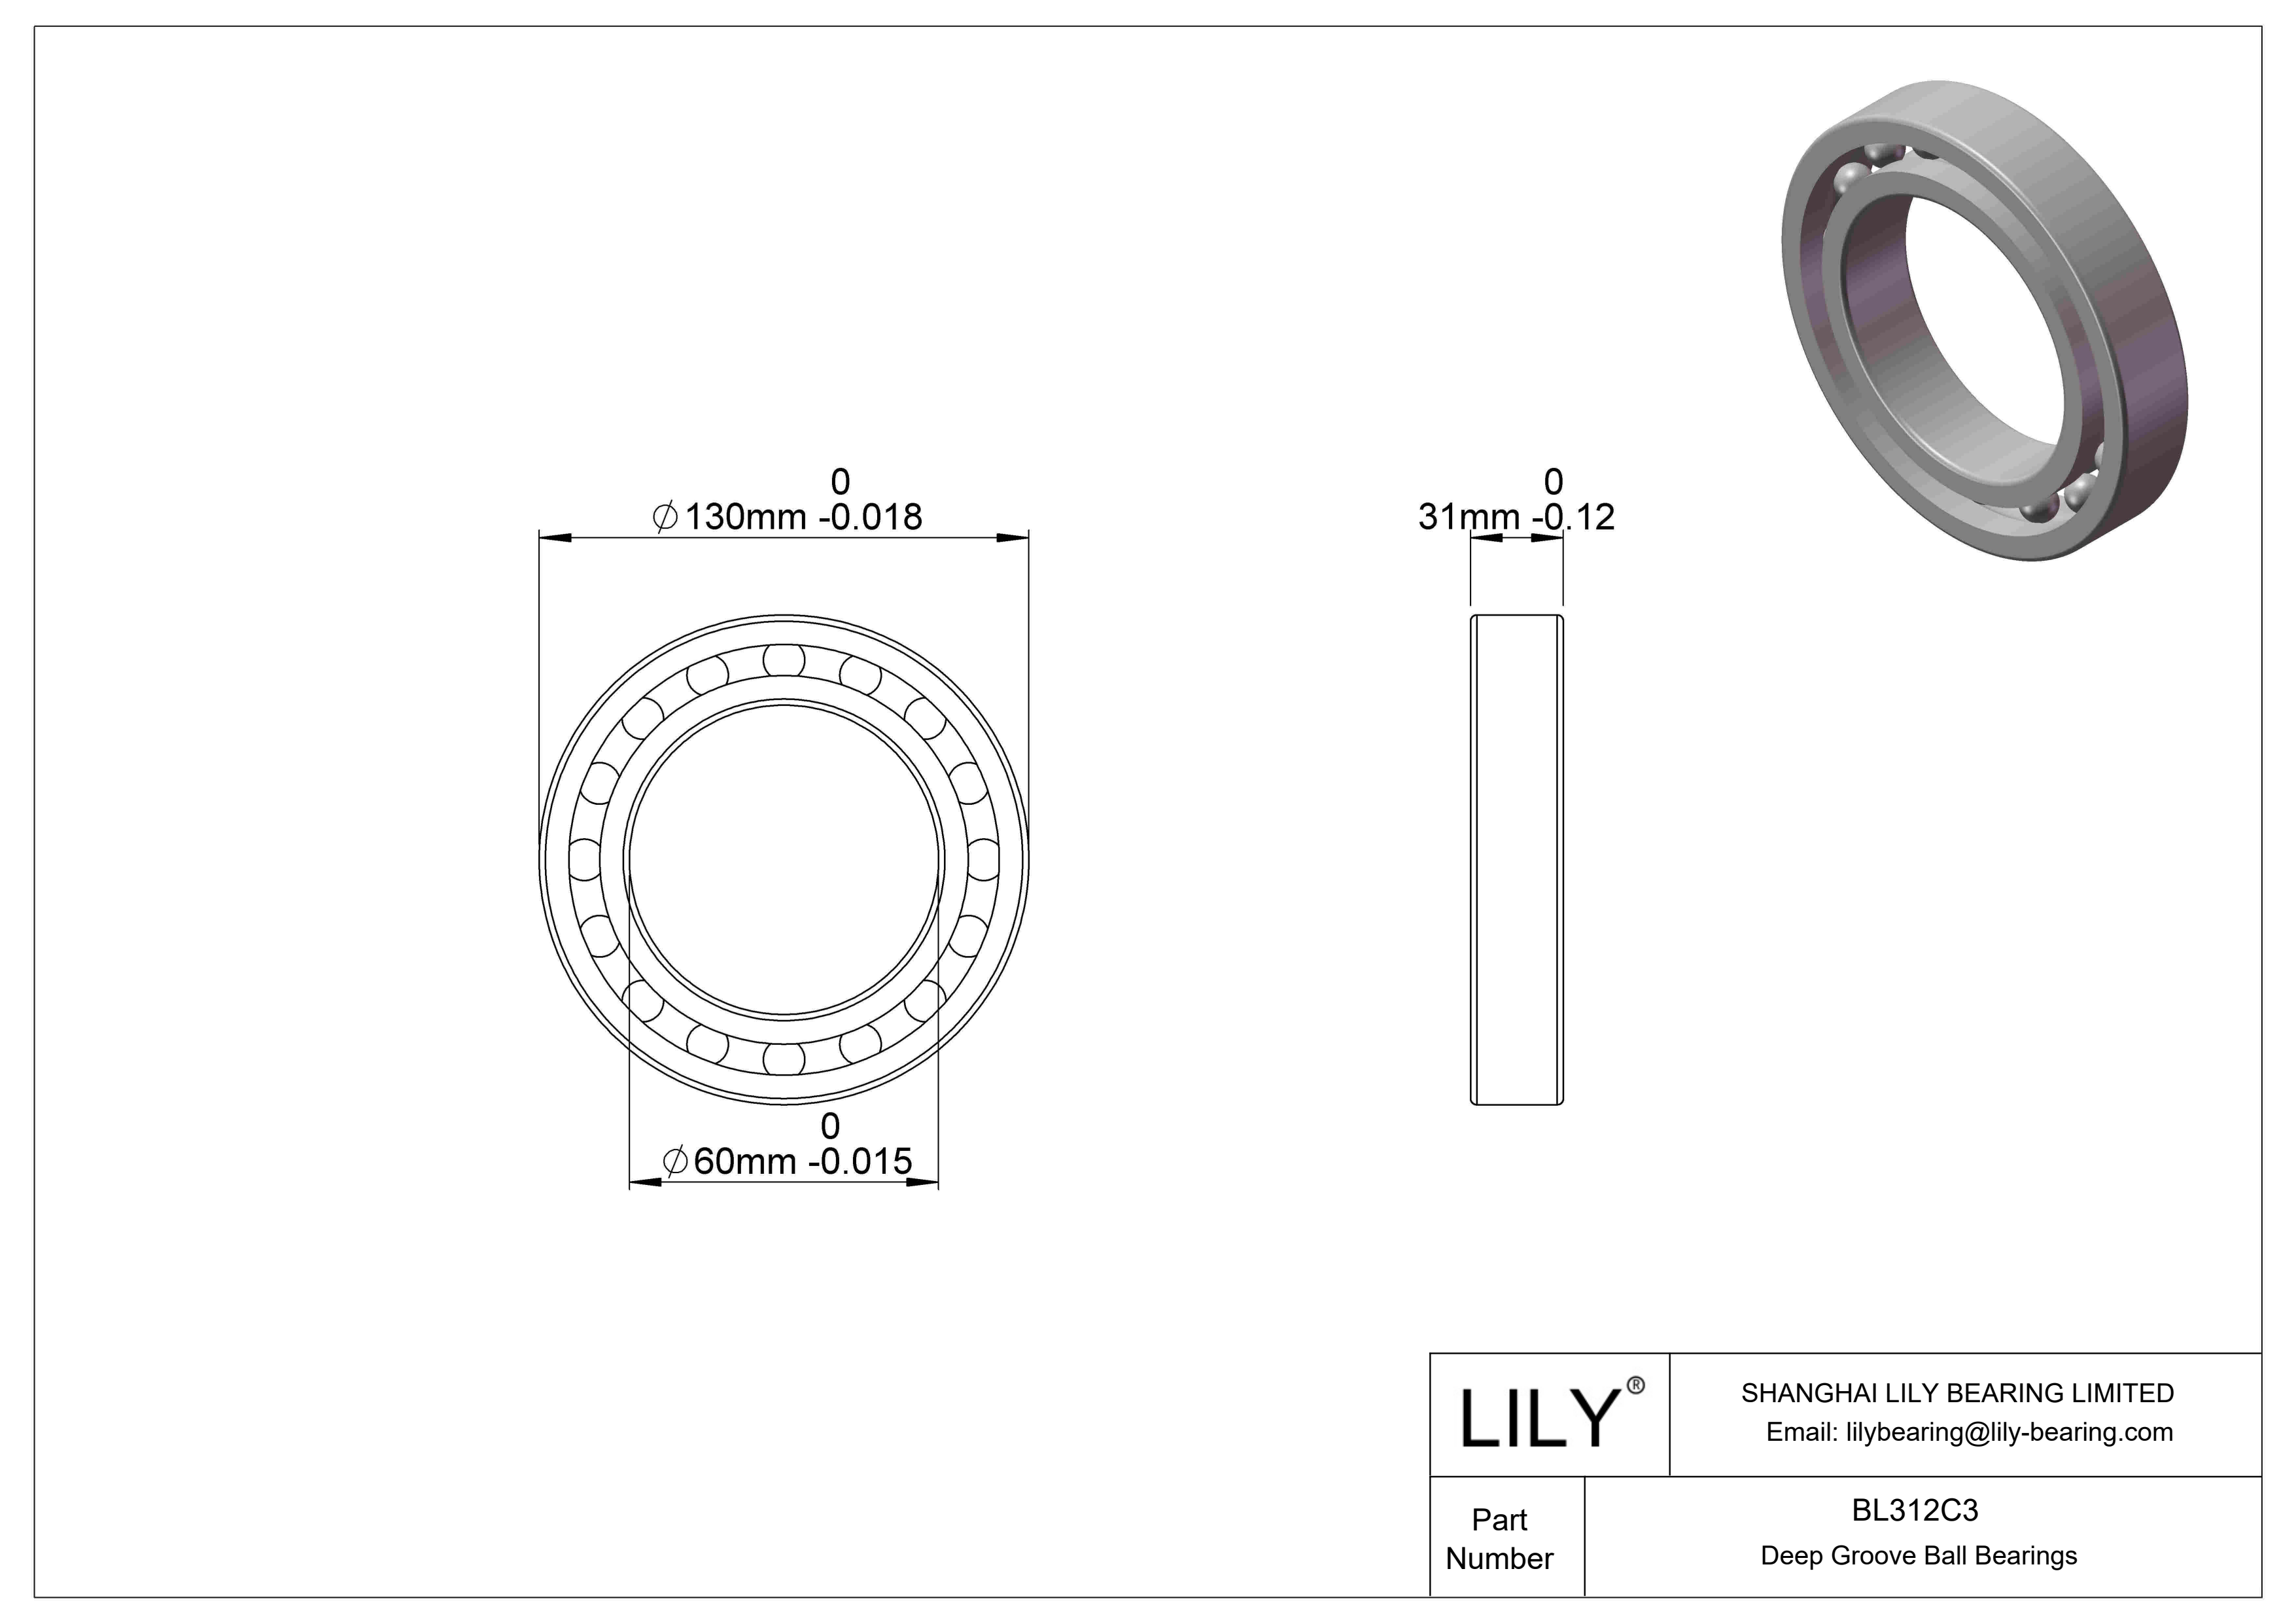 BL312C3 General Deep Groove Ball Bearing cad drawing